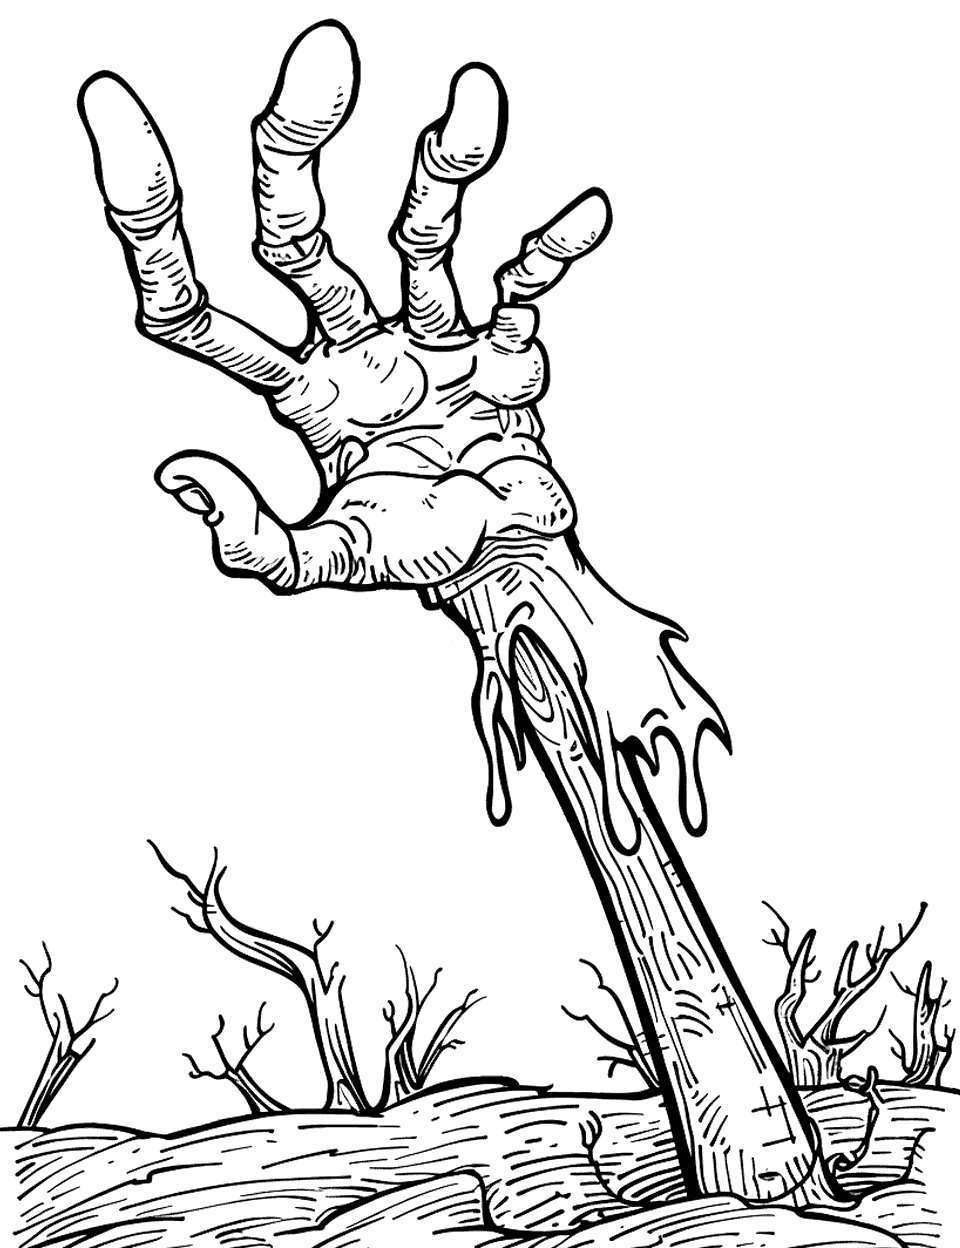 Detailed Zombie Hand Coloring Page - A close-up of a zombie hand reaching out from the ground.